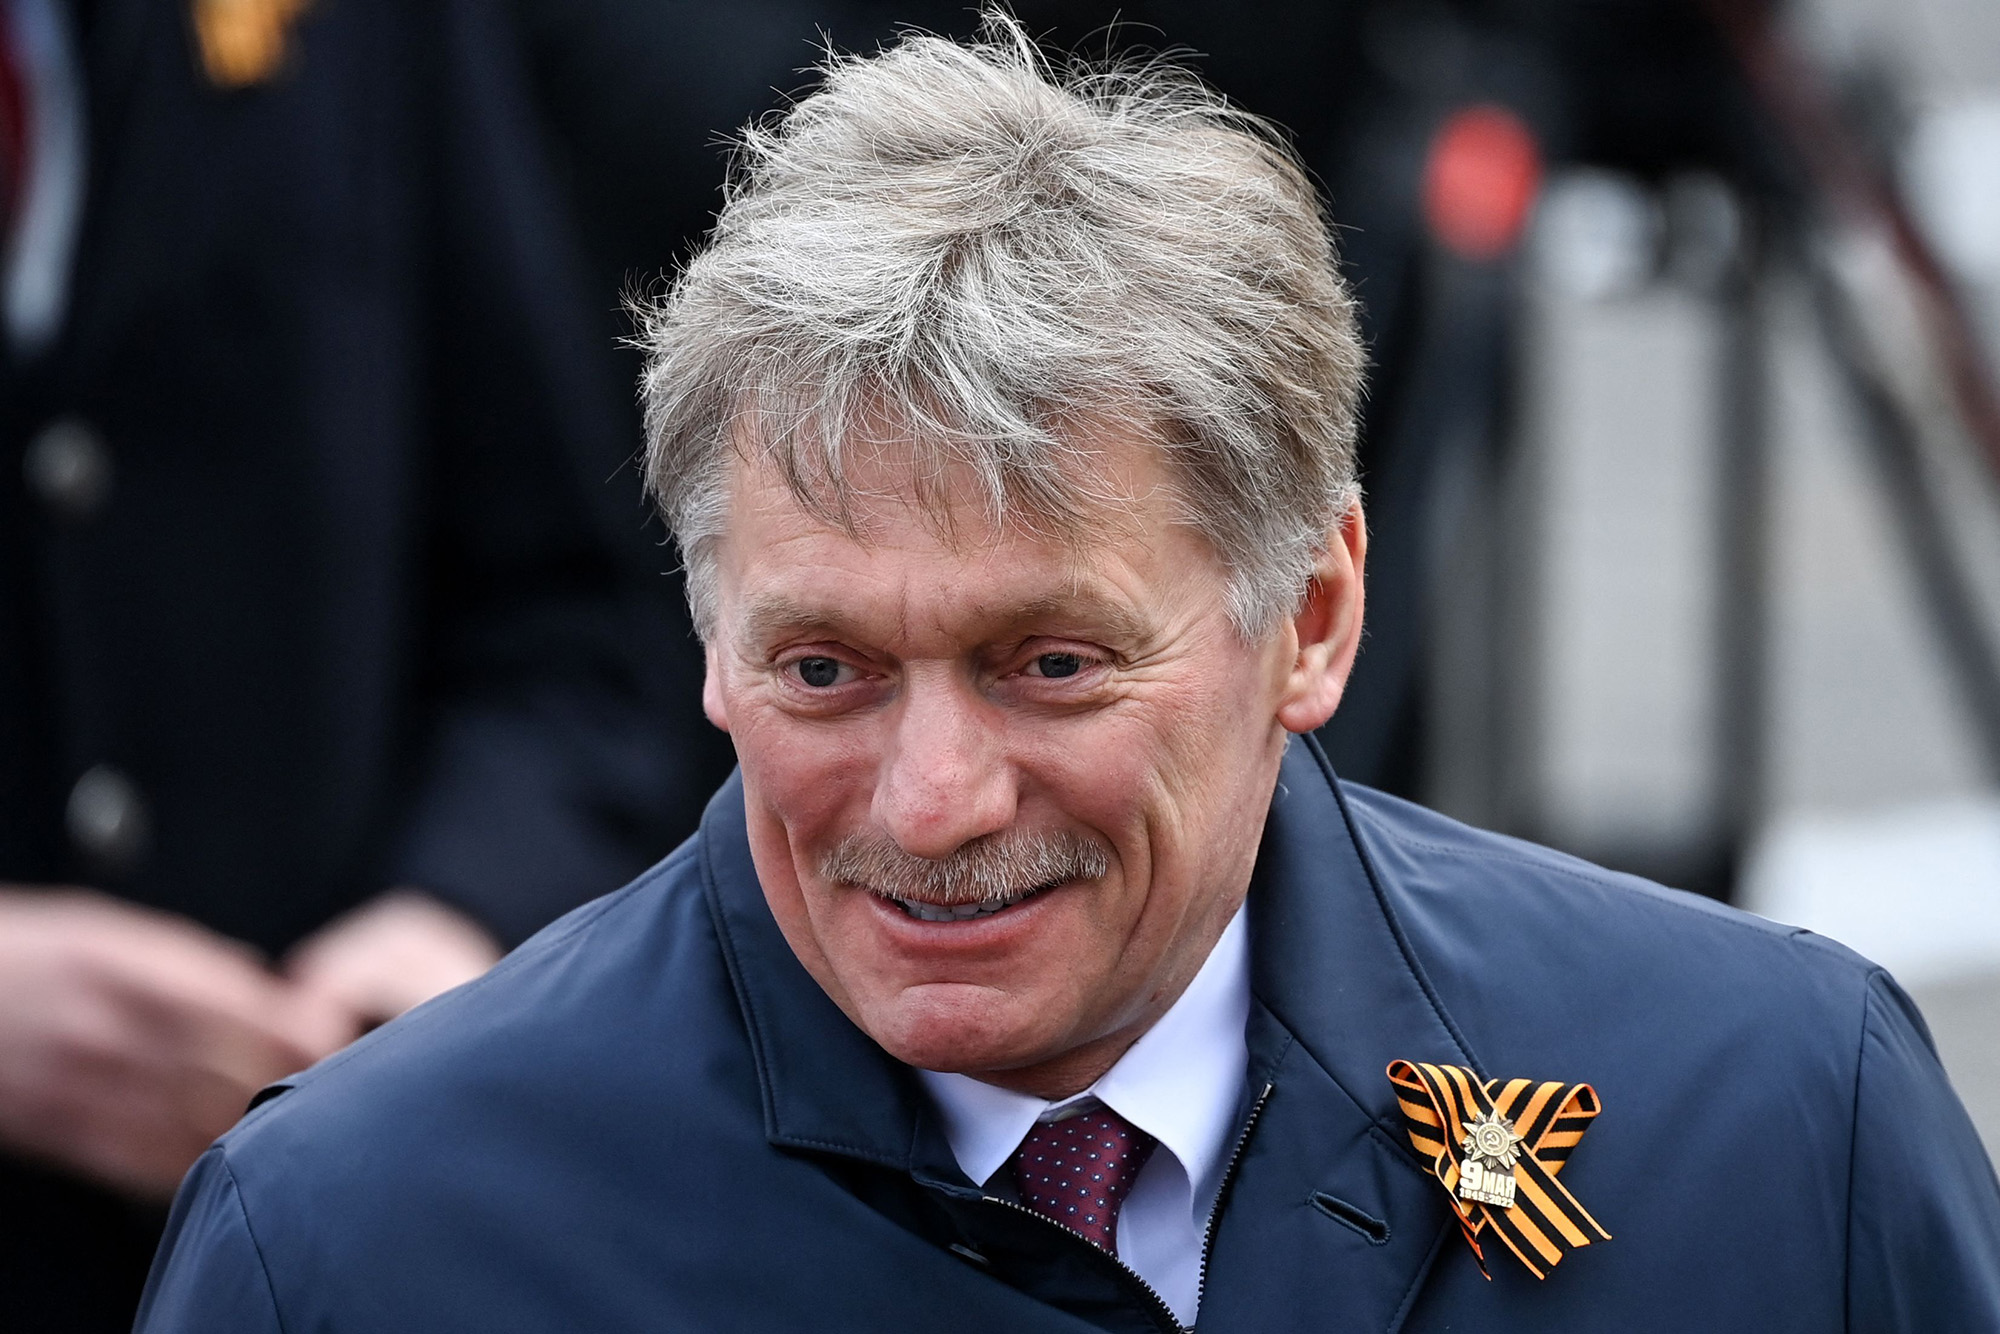 Kremlin spokesman Dmitry Peskov attends the Victory Day military parade at Red Square in central Moscow, Russia on May 9.